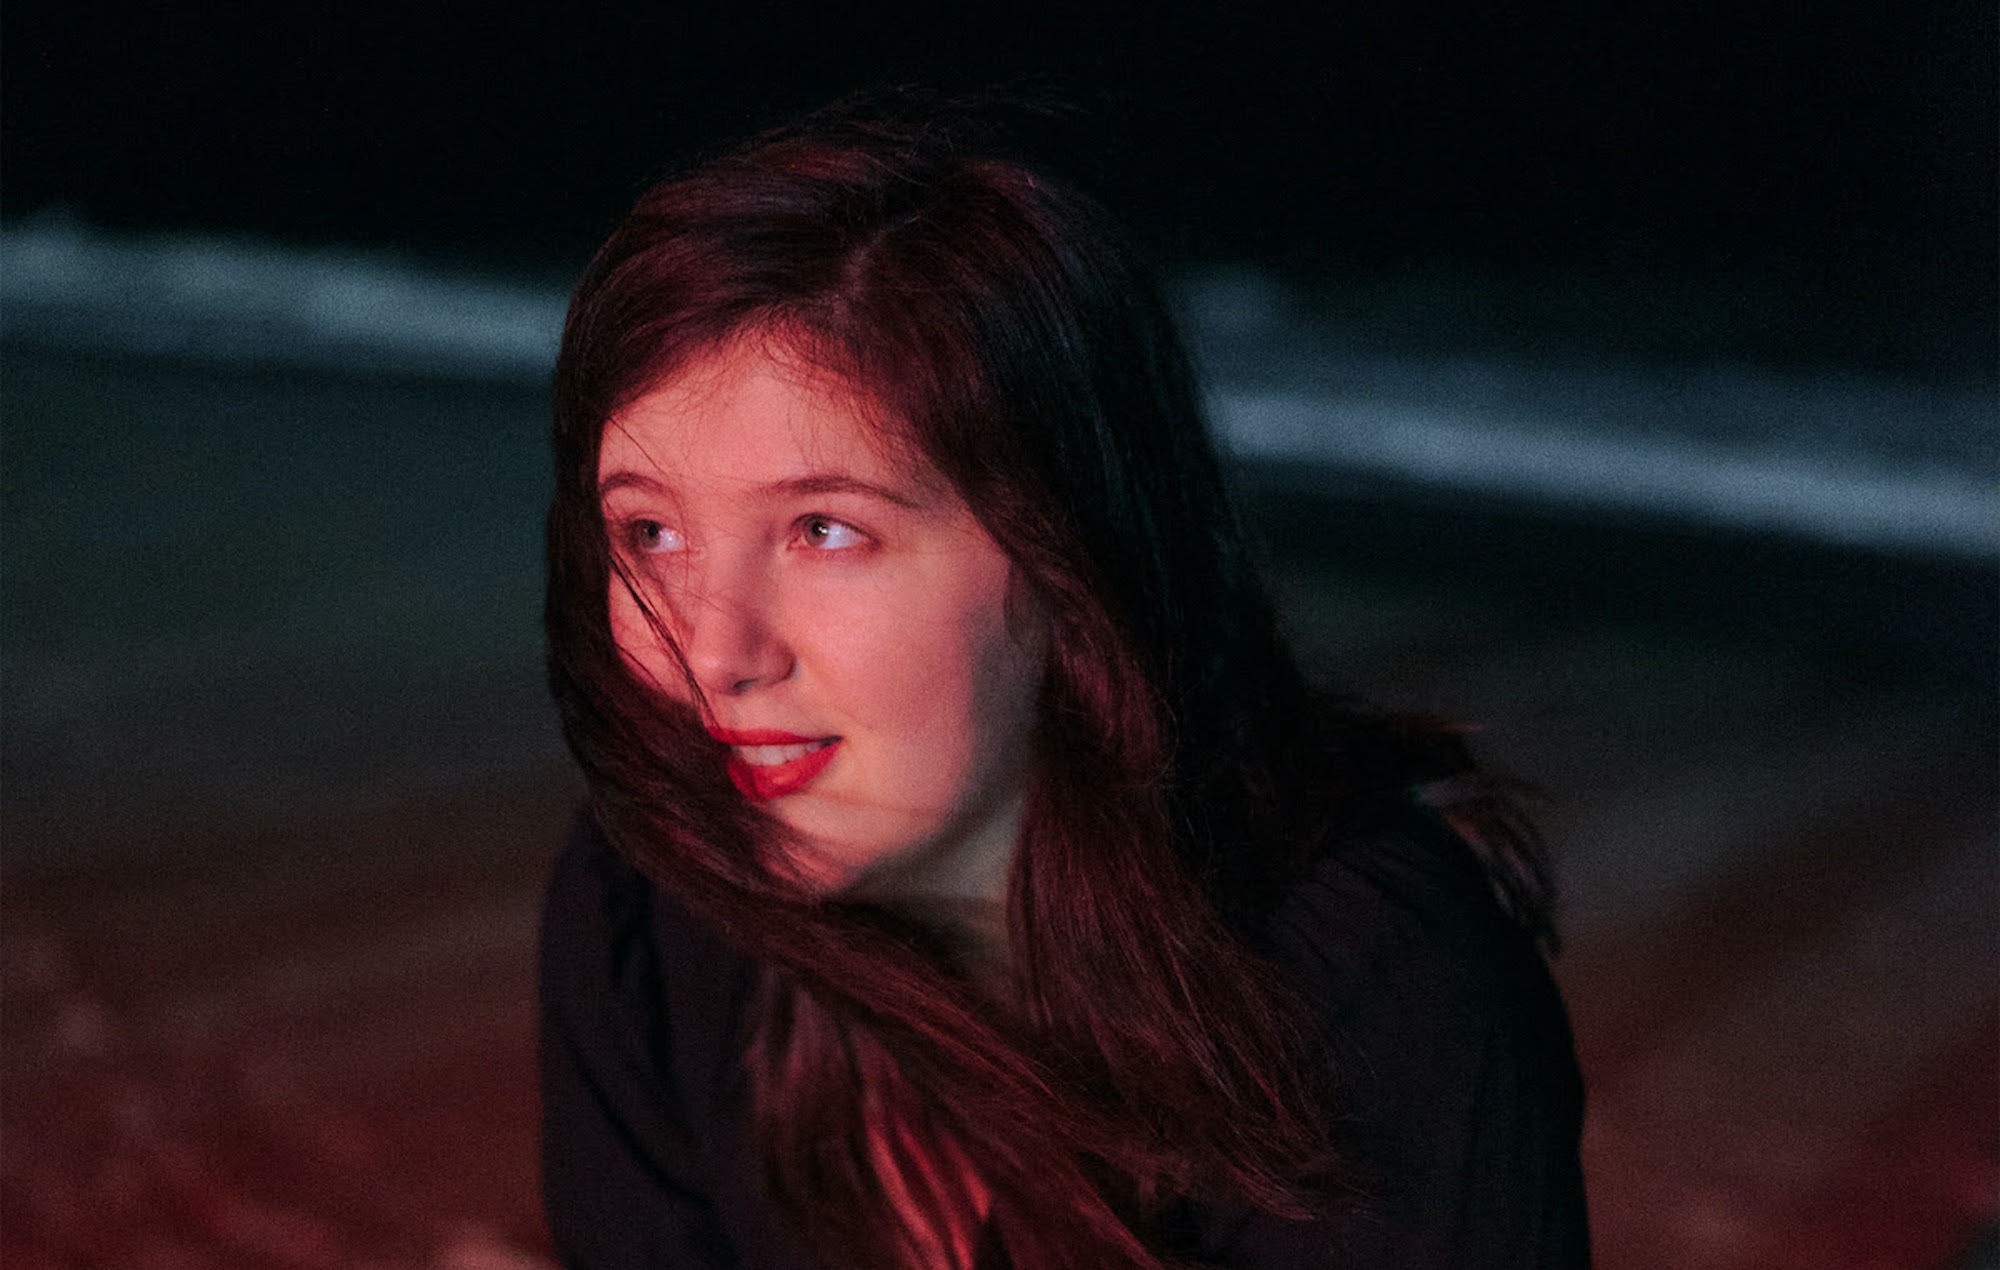 Lucy Dacus: “This record is just one step on the staircase of revelation”